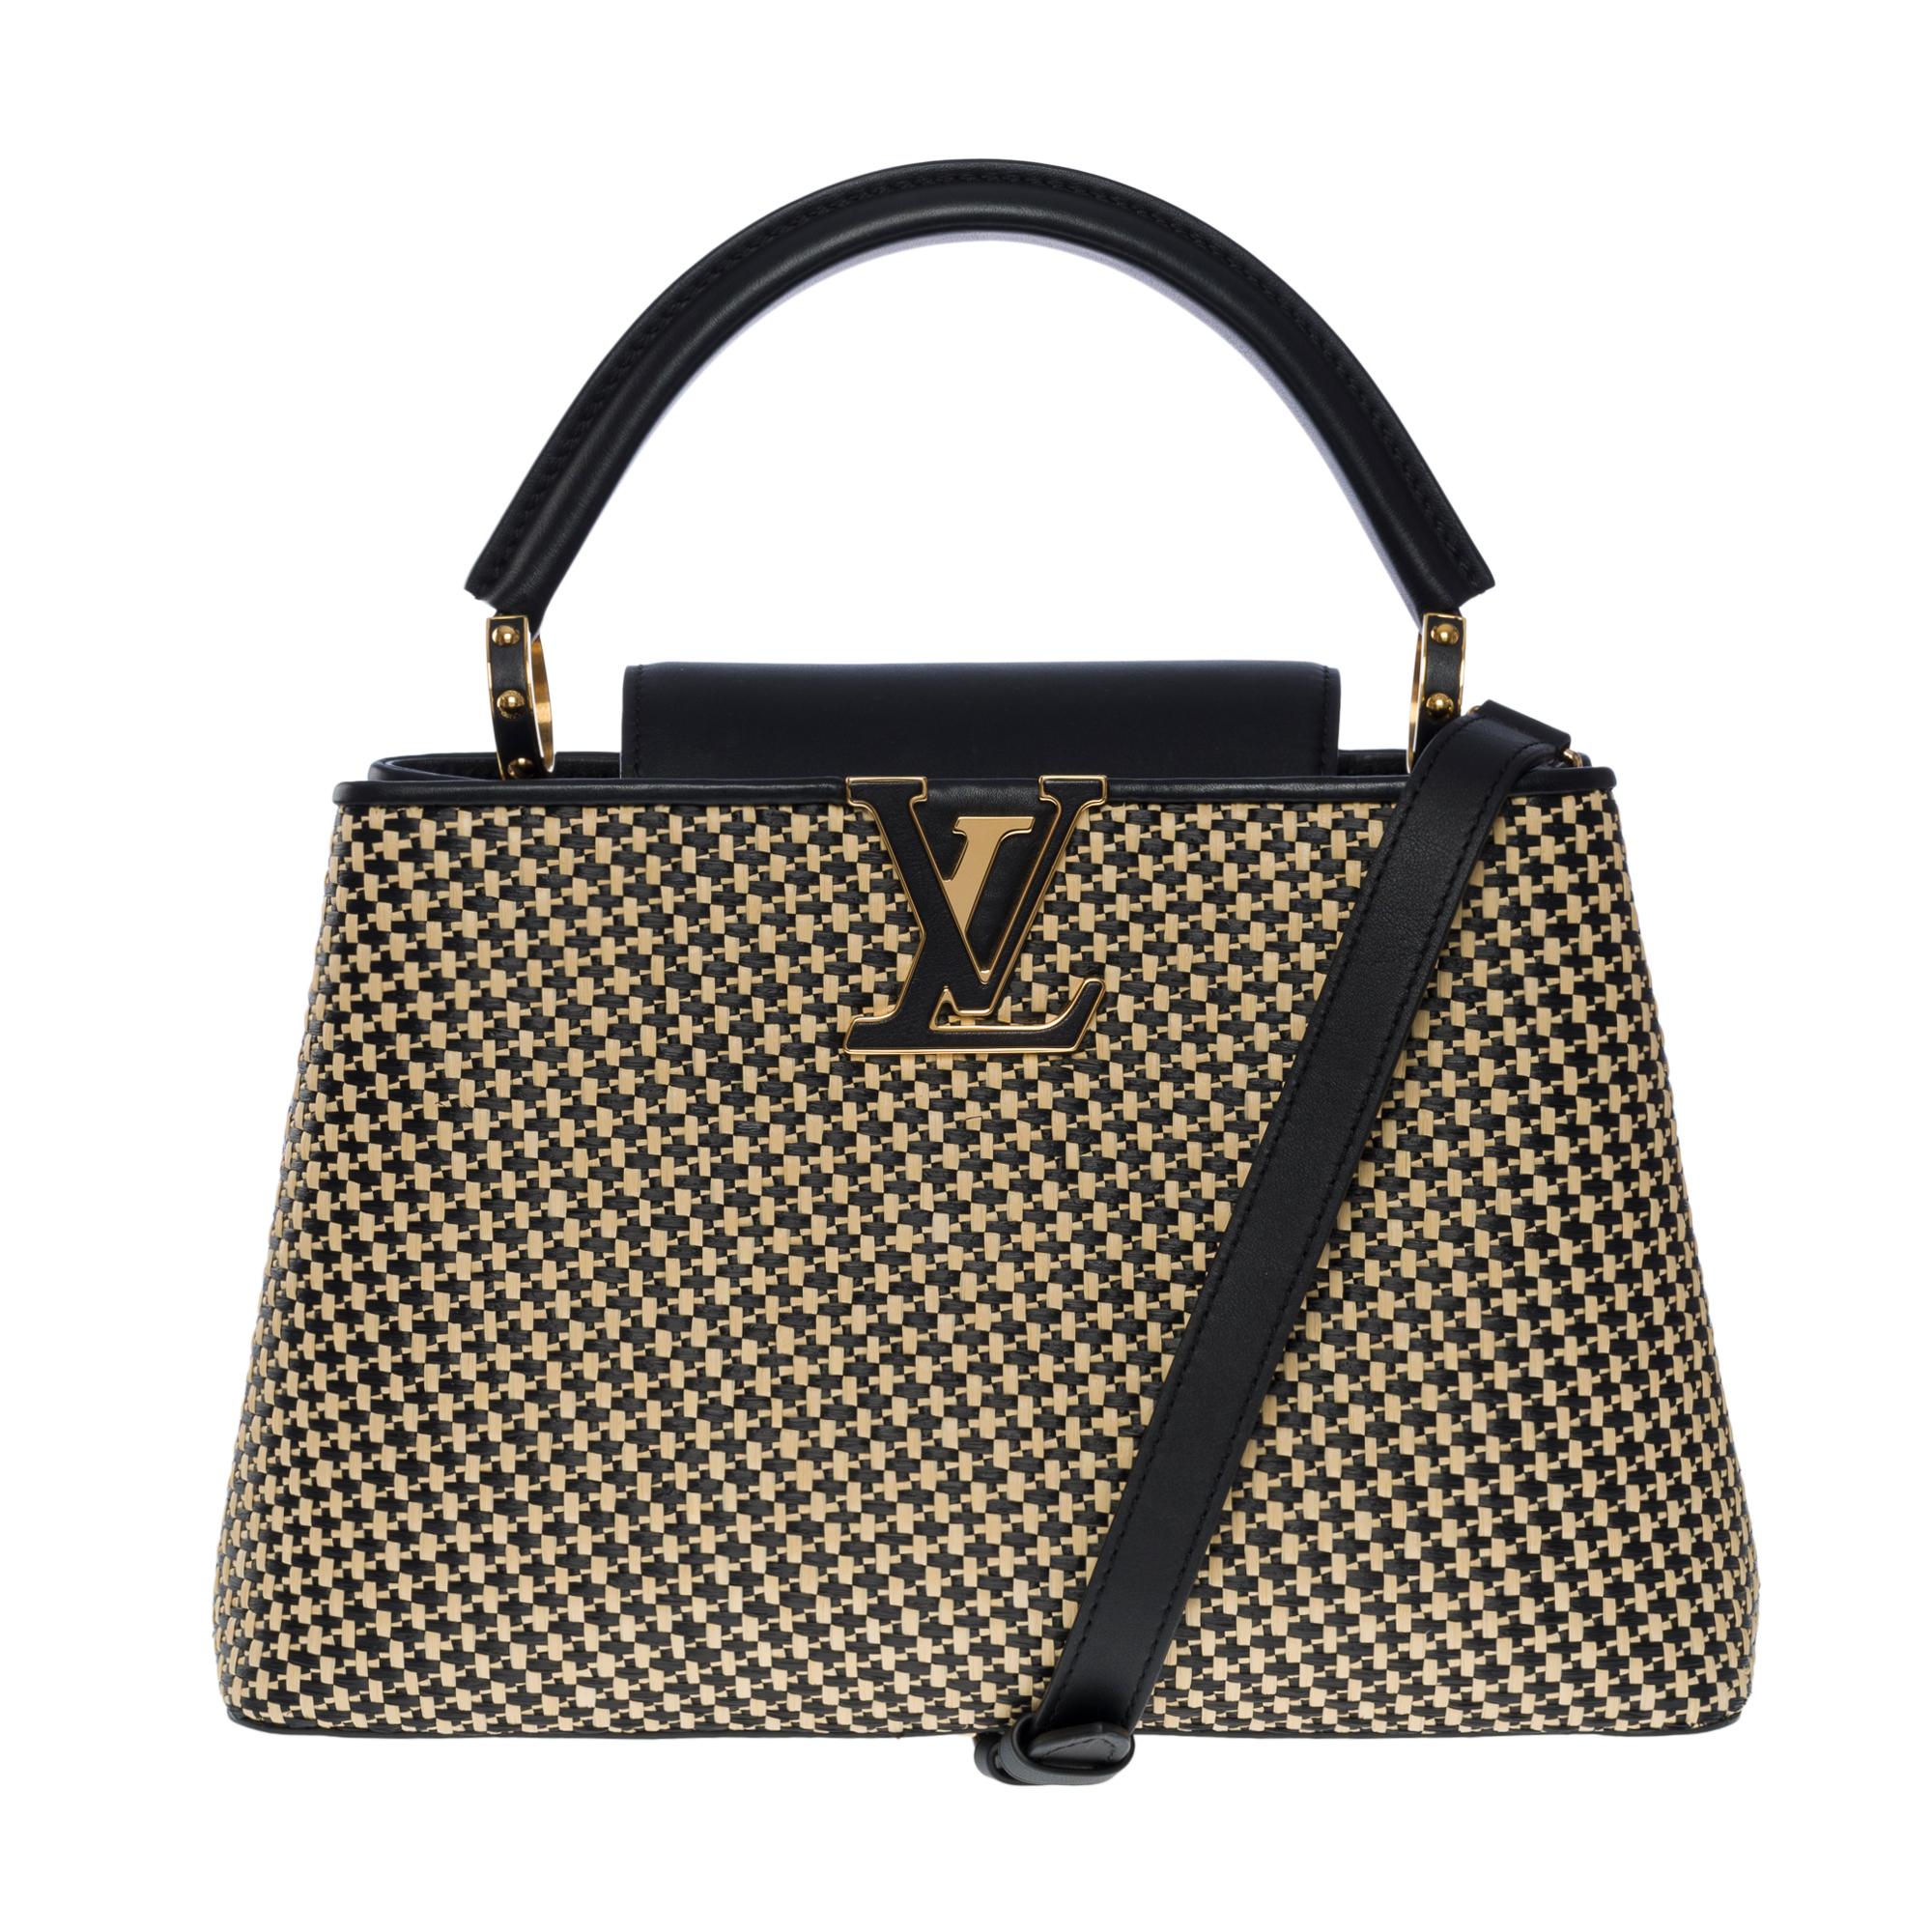 Ultra Exclusive- limited edition Capucines Raffia

This Capucines MM limited edition handbag strap is made of raffia braided with leather to create an elegant and refined silhouette. The smooth cow leather on the handle and strap perfectly